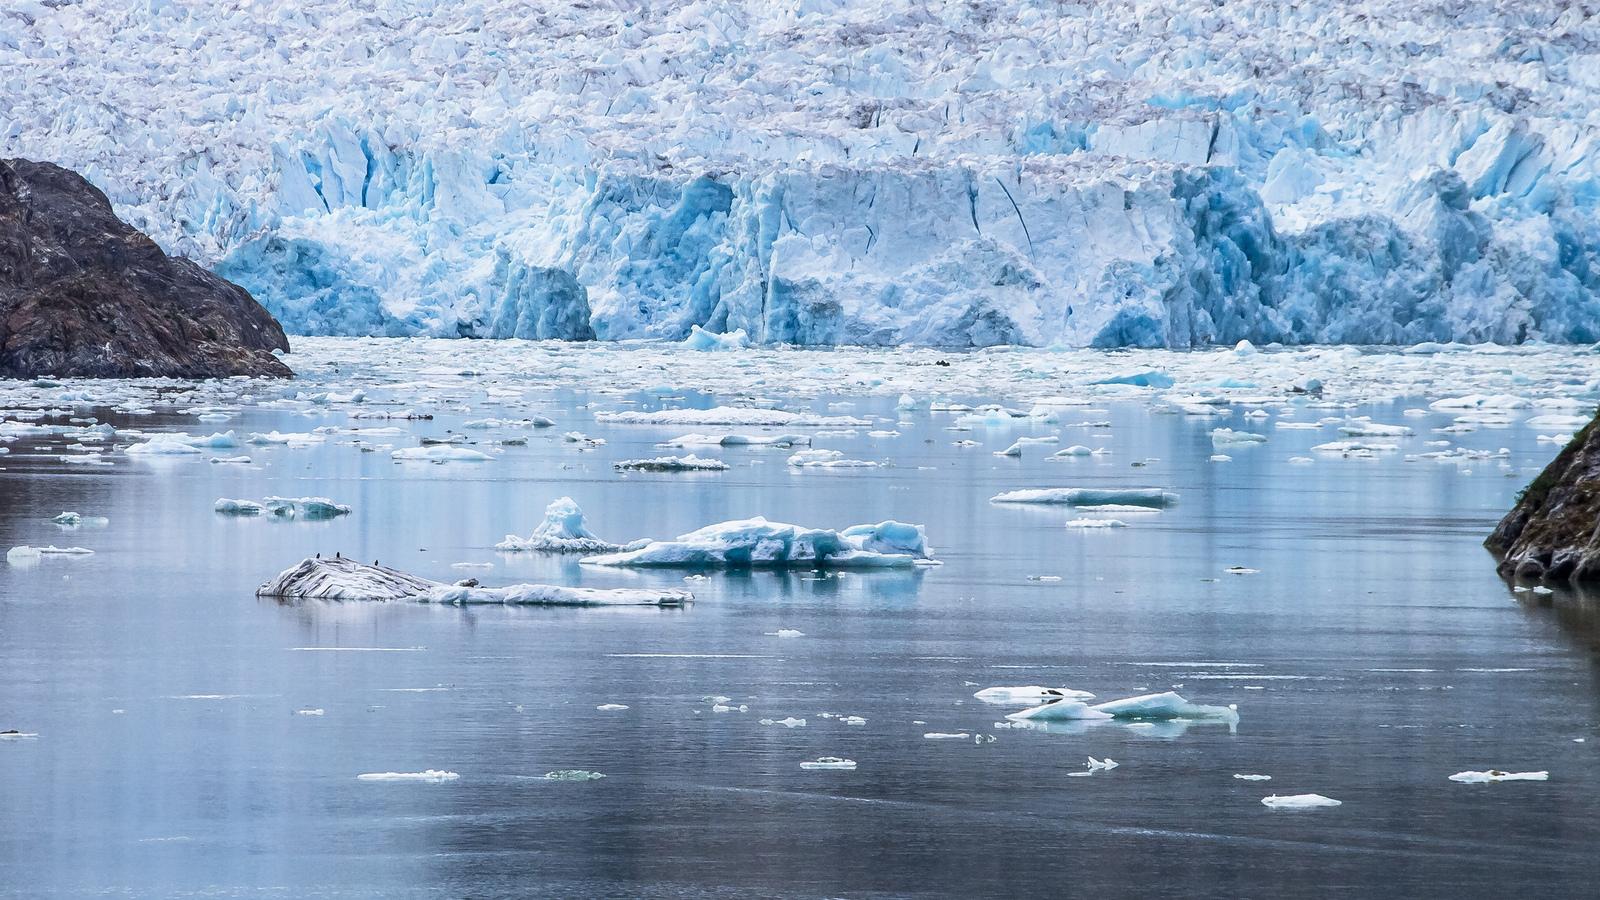 Bits of icebergs can be seen that have broken off the Sawyer Glacier in Alaska, where the effects of climate change are being felt at a higher rate than the Lower 48.